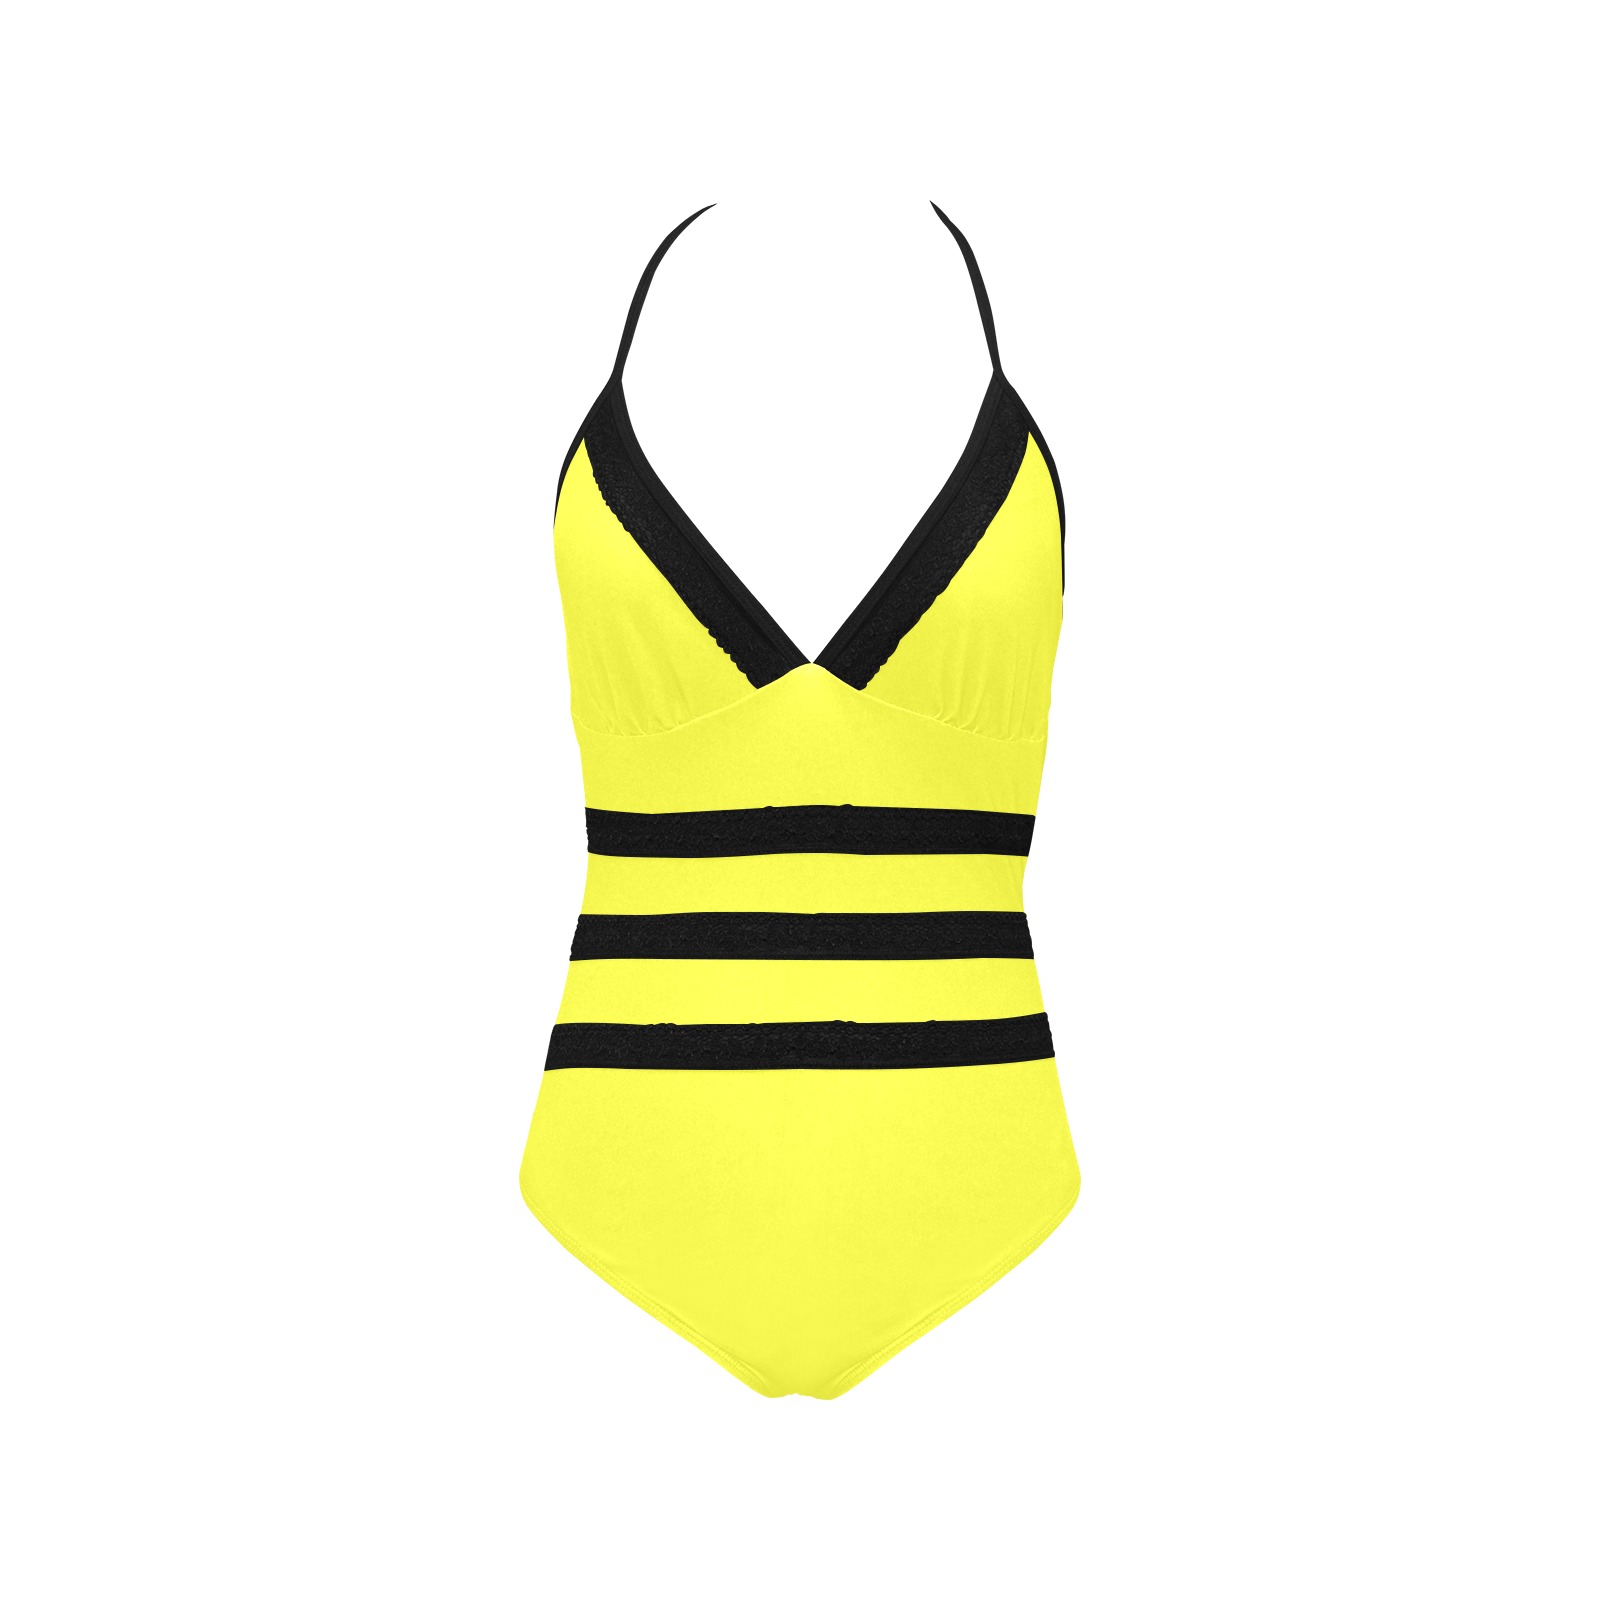 color maximum yellow Lace Band Embossing Swimsuit (Model S15)